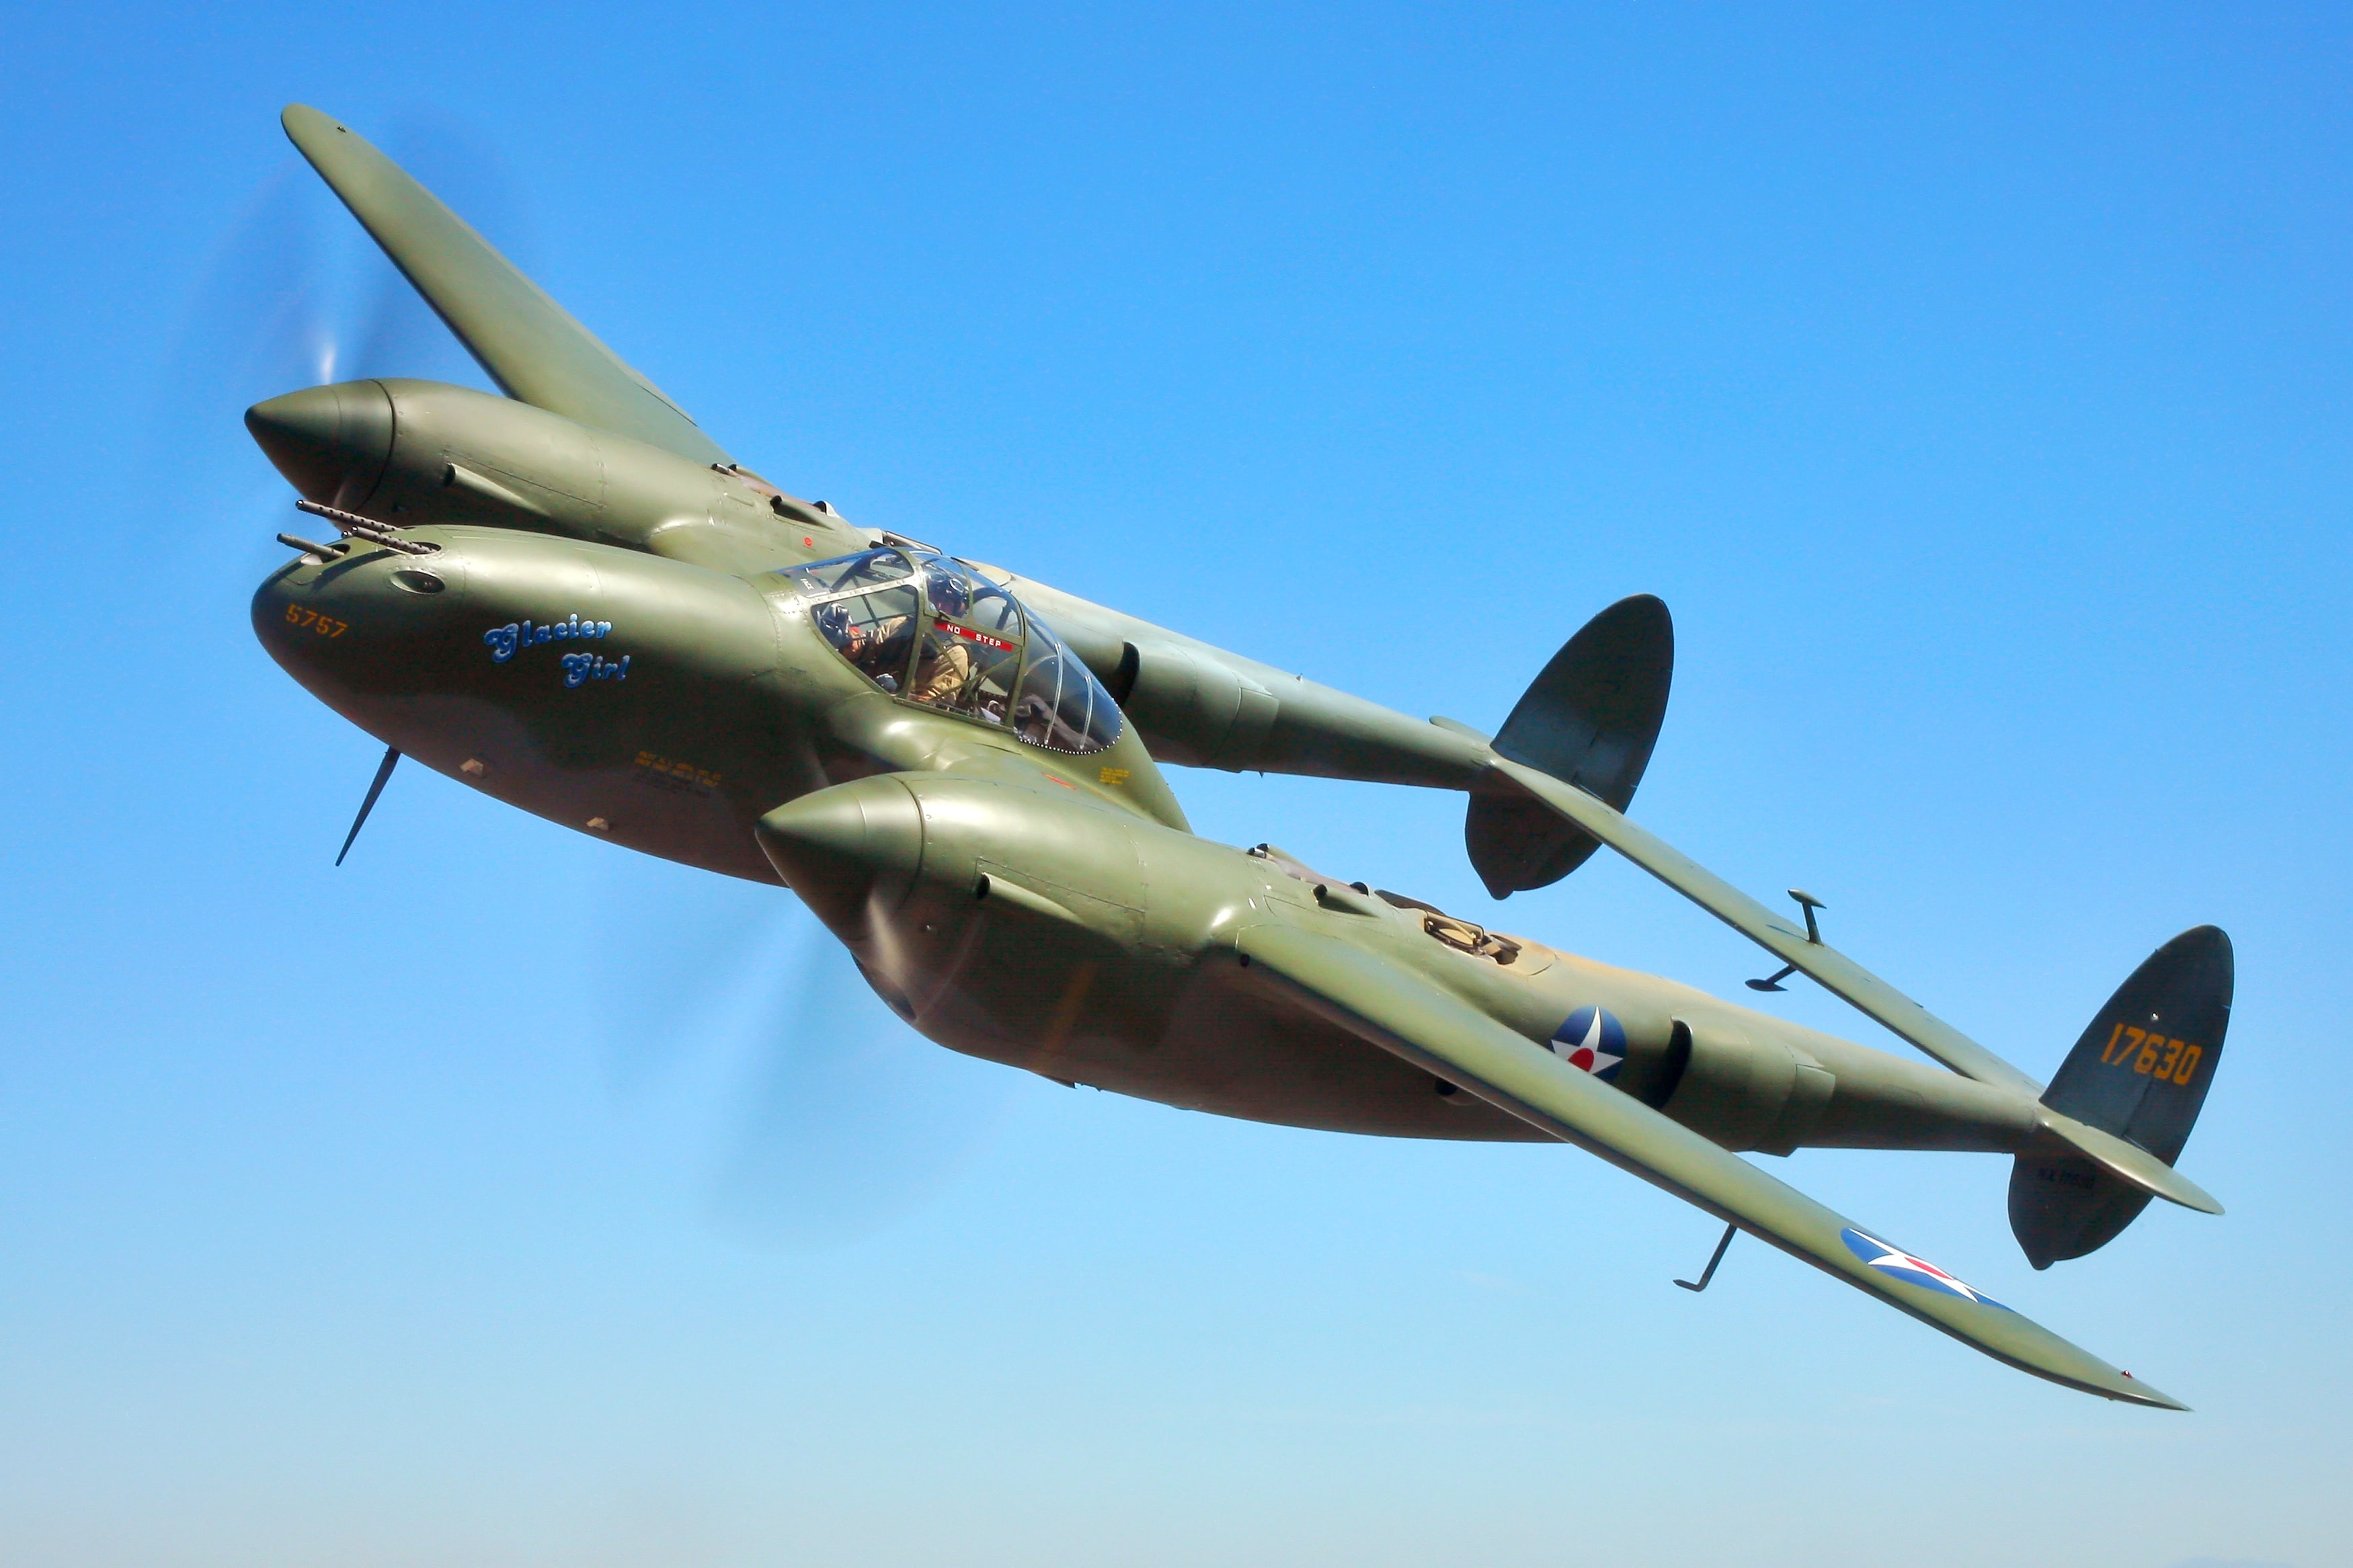 green and black airplane, the sky, the plane, American, Lockheed P-38 Lightning